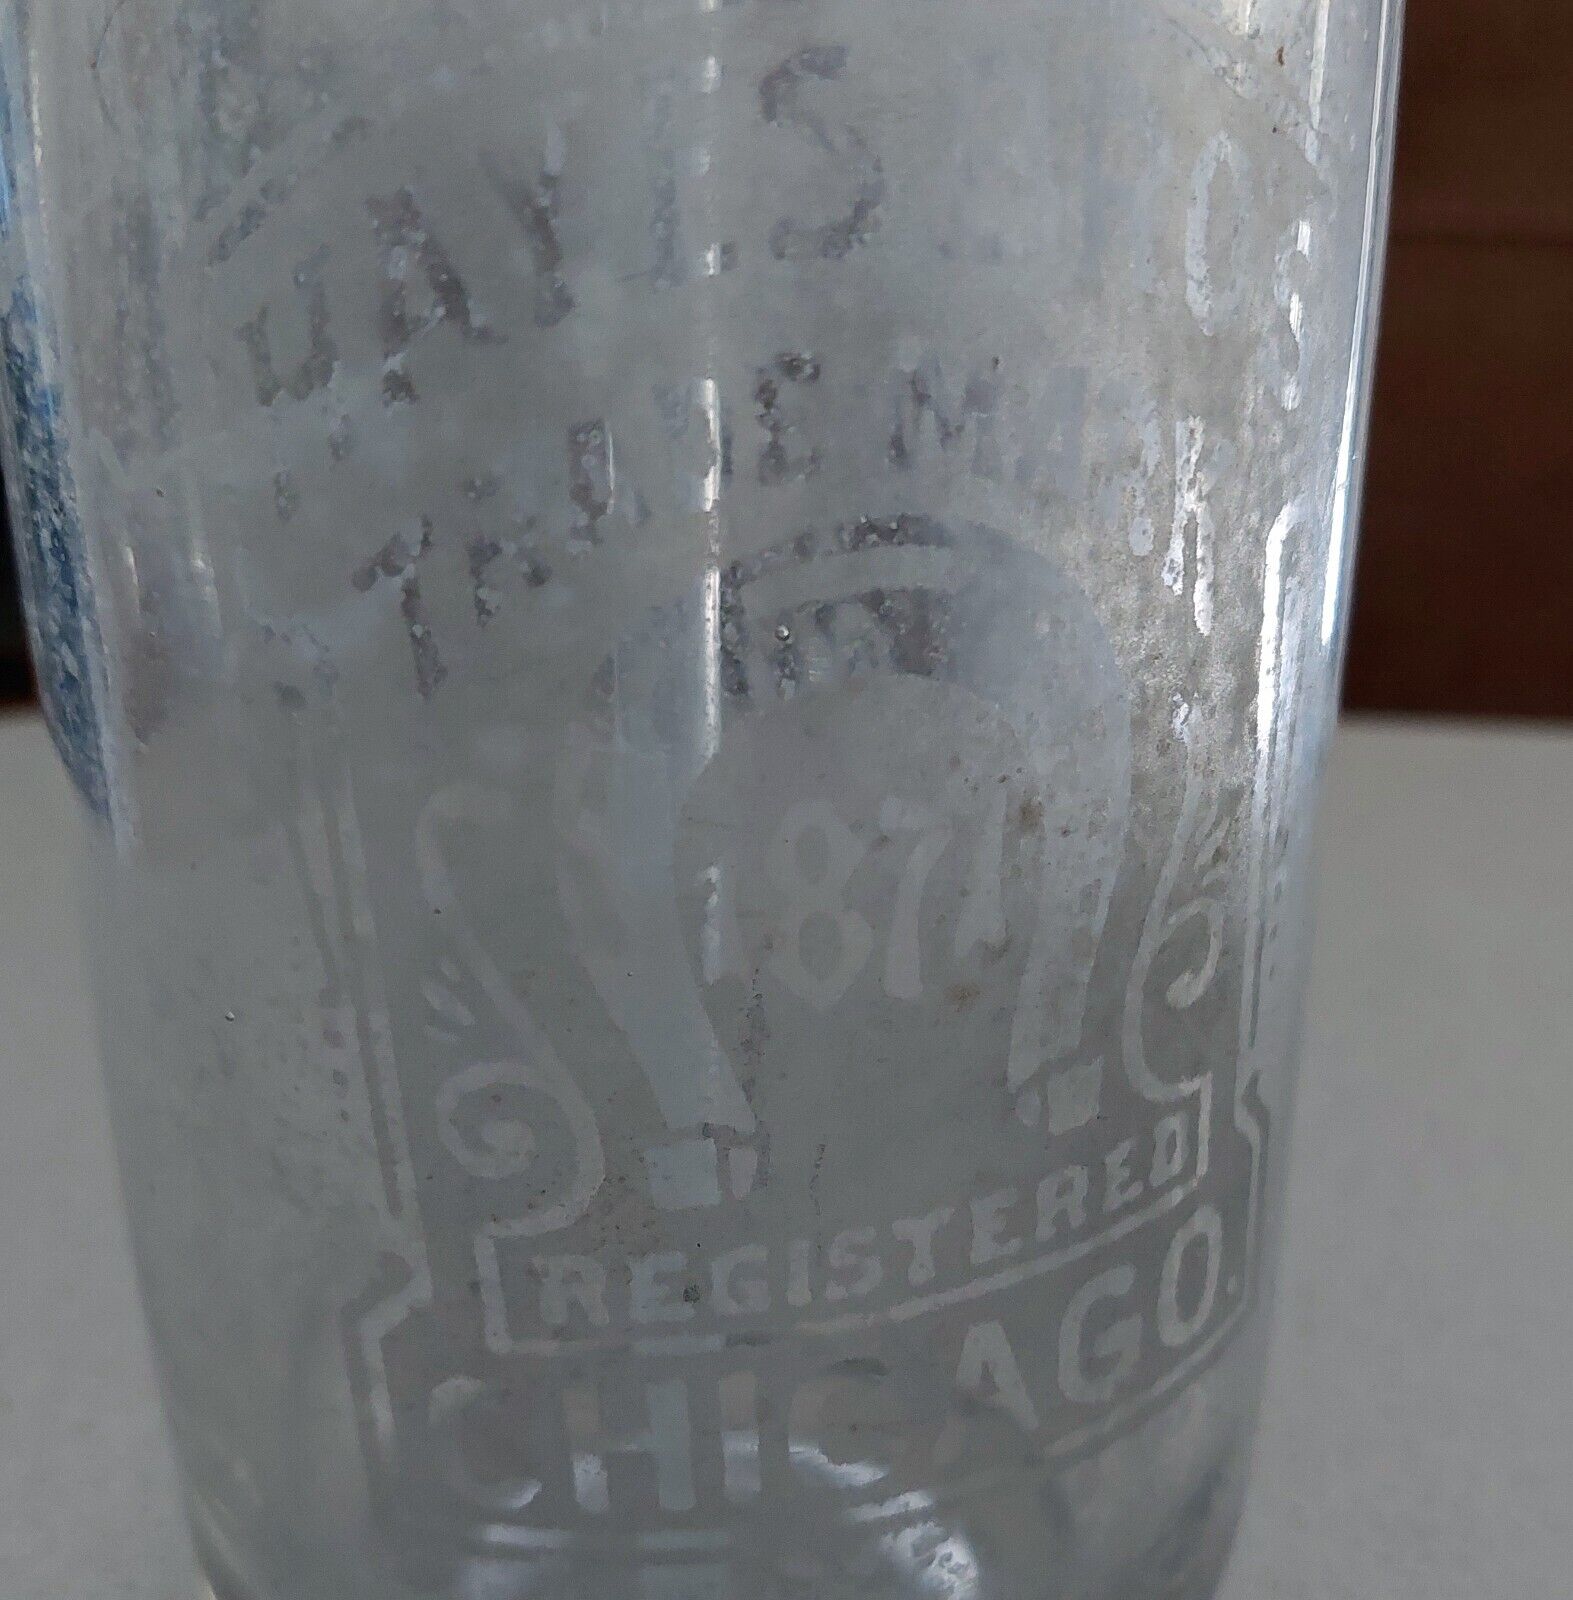 Rare Antique 1871 SELTZER Bottle HAYES BROS Nelsonville Ohio STAR MINERAL WATER